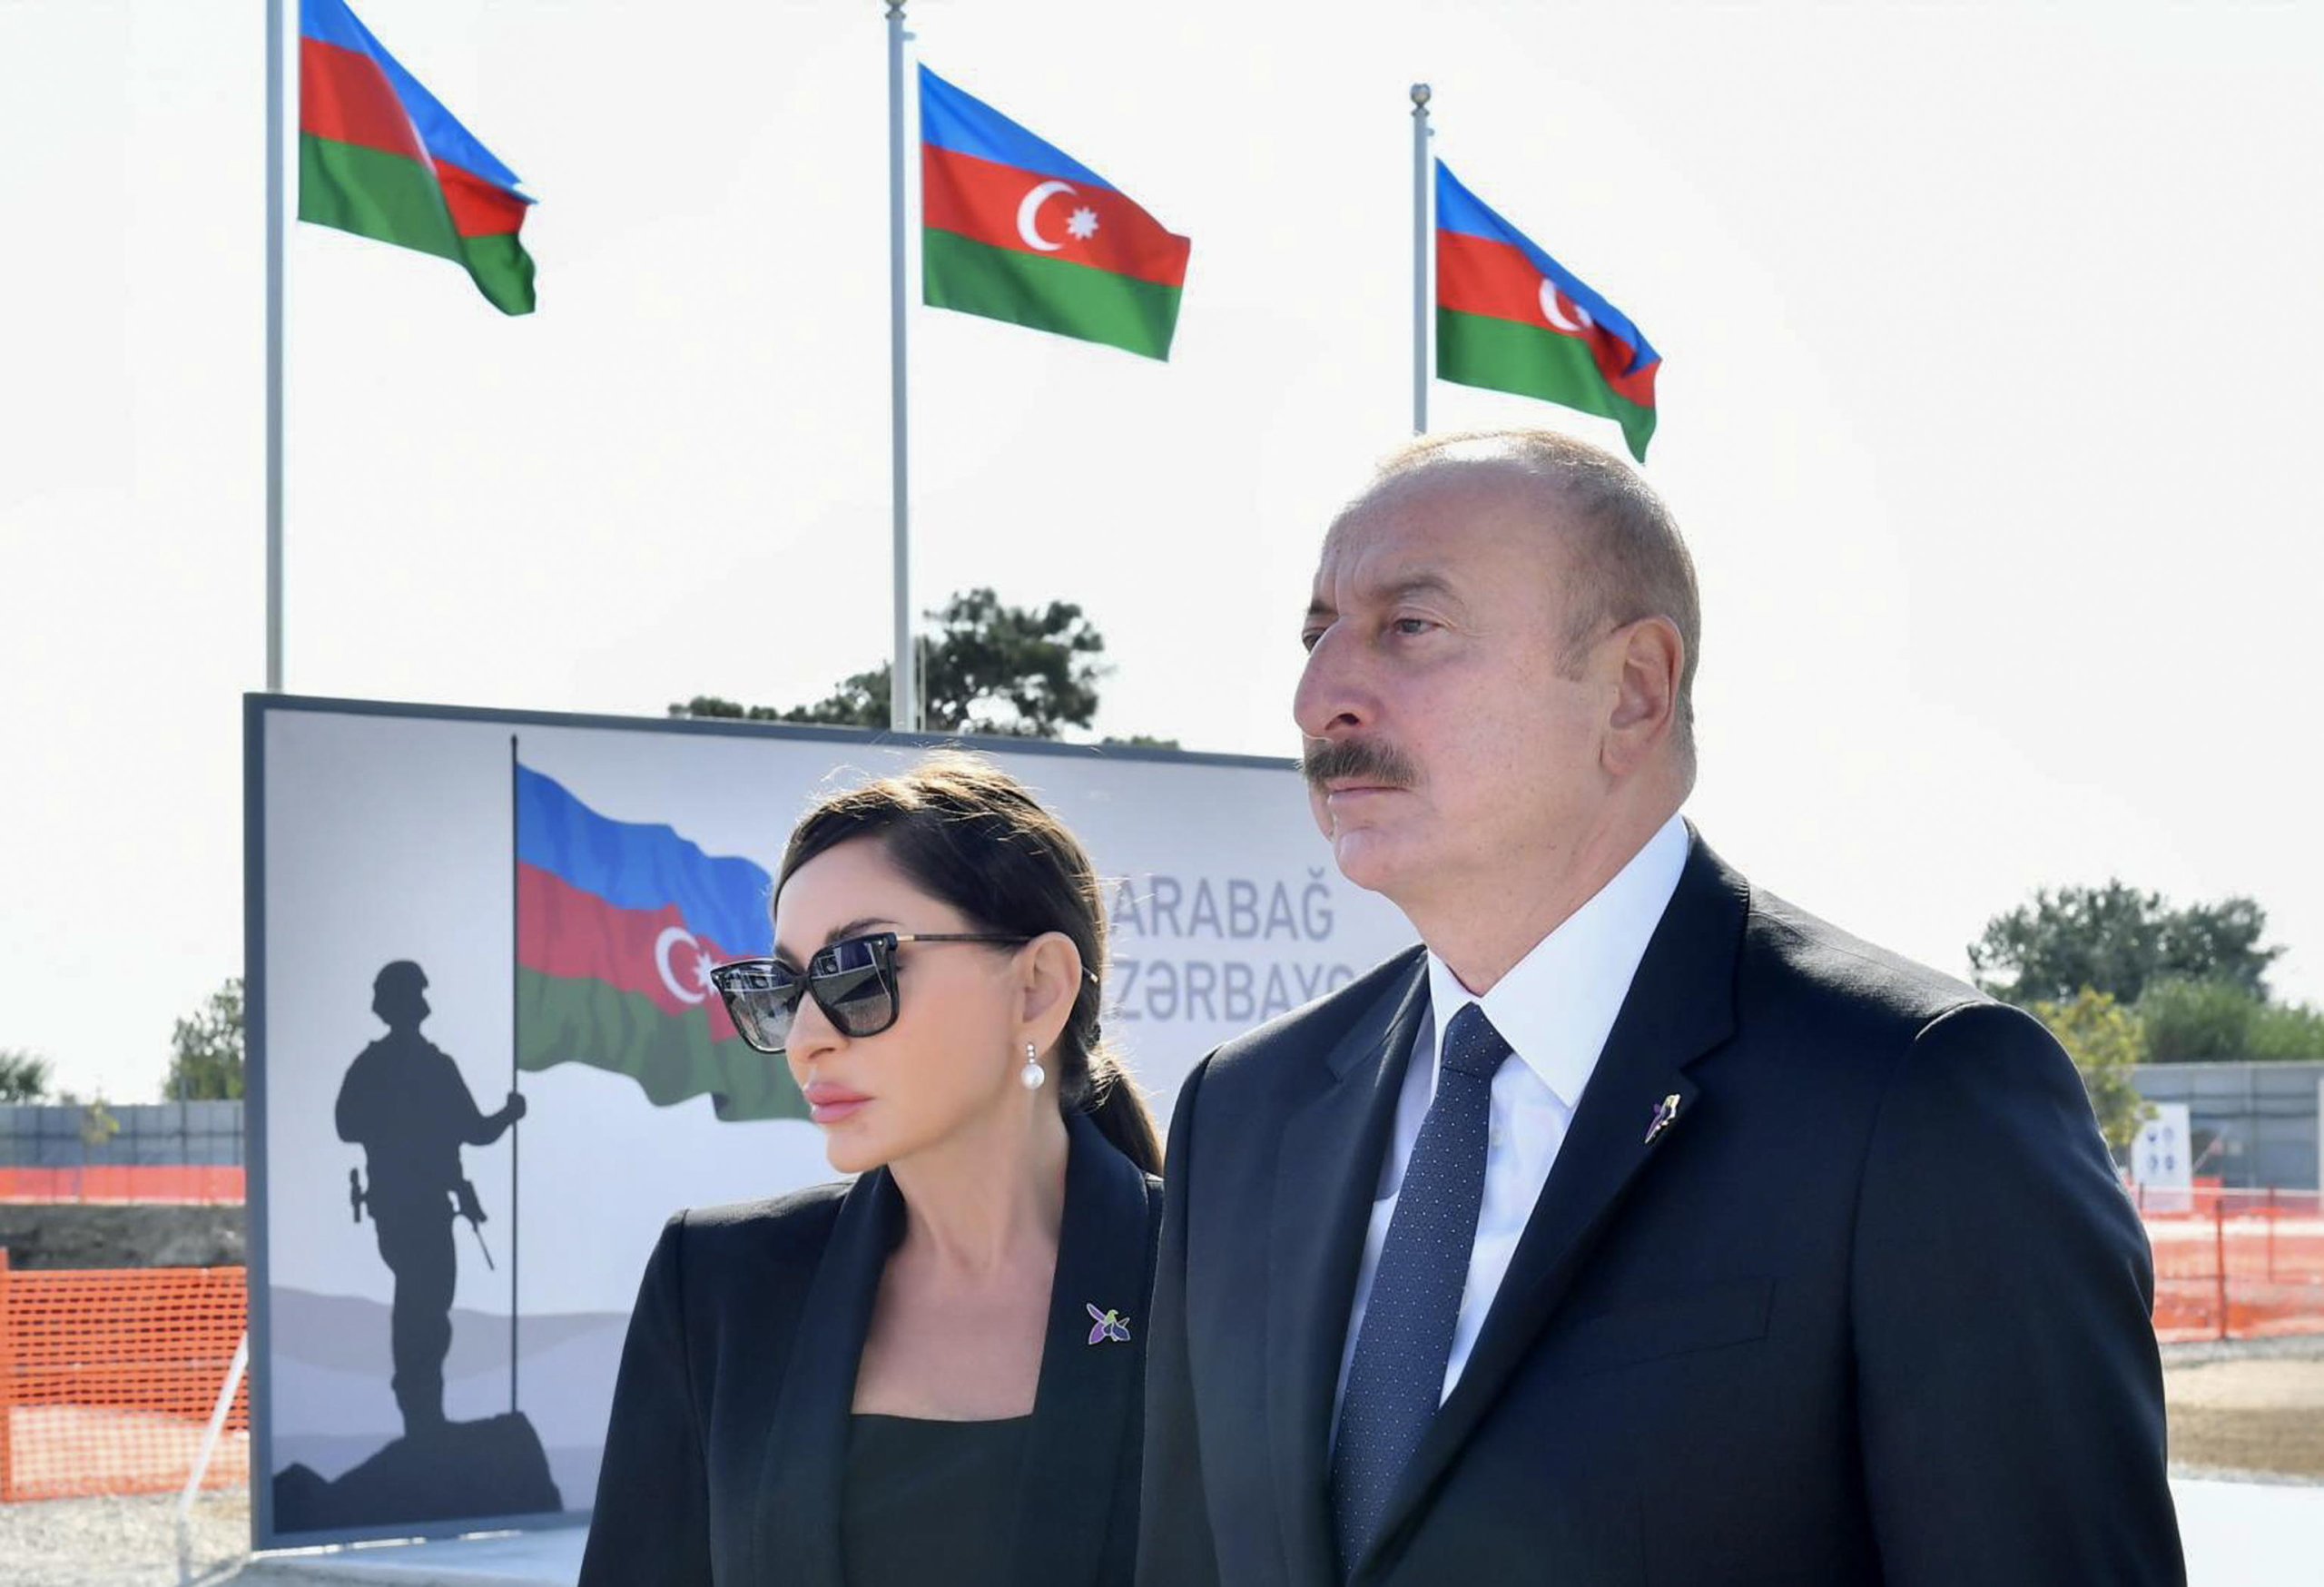 epa10885437 A handout photo made available by Azerbaijan President Press Service shows Azerbaijan's President Ilham Aliyev (R) and First Lady of Azerbaijan, Mehriban Aliyeva attending a flower-laying ceremony at the memorial stone in Victory Park, which is under construction, during Remembrance Day celebrations, in Baku, Azerbaijan, 27 September 2023. Azerbaijan pays tribute to the heroes of the 44-day Karabakh war in 2020, which began on 27 September, with an Azerbaijani offensive that reclaimed regions around the disputed former Nagorno-Karabakh Autonomous Region, the former Hadrut region and the city of Shusha.  EPA/AZERBAIJAN PRESIDENT PRESS SERVICE / HANDOUT  HANDOUT EDITORIAL USE ONLY/NO SALES